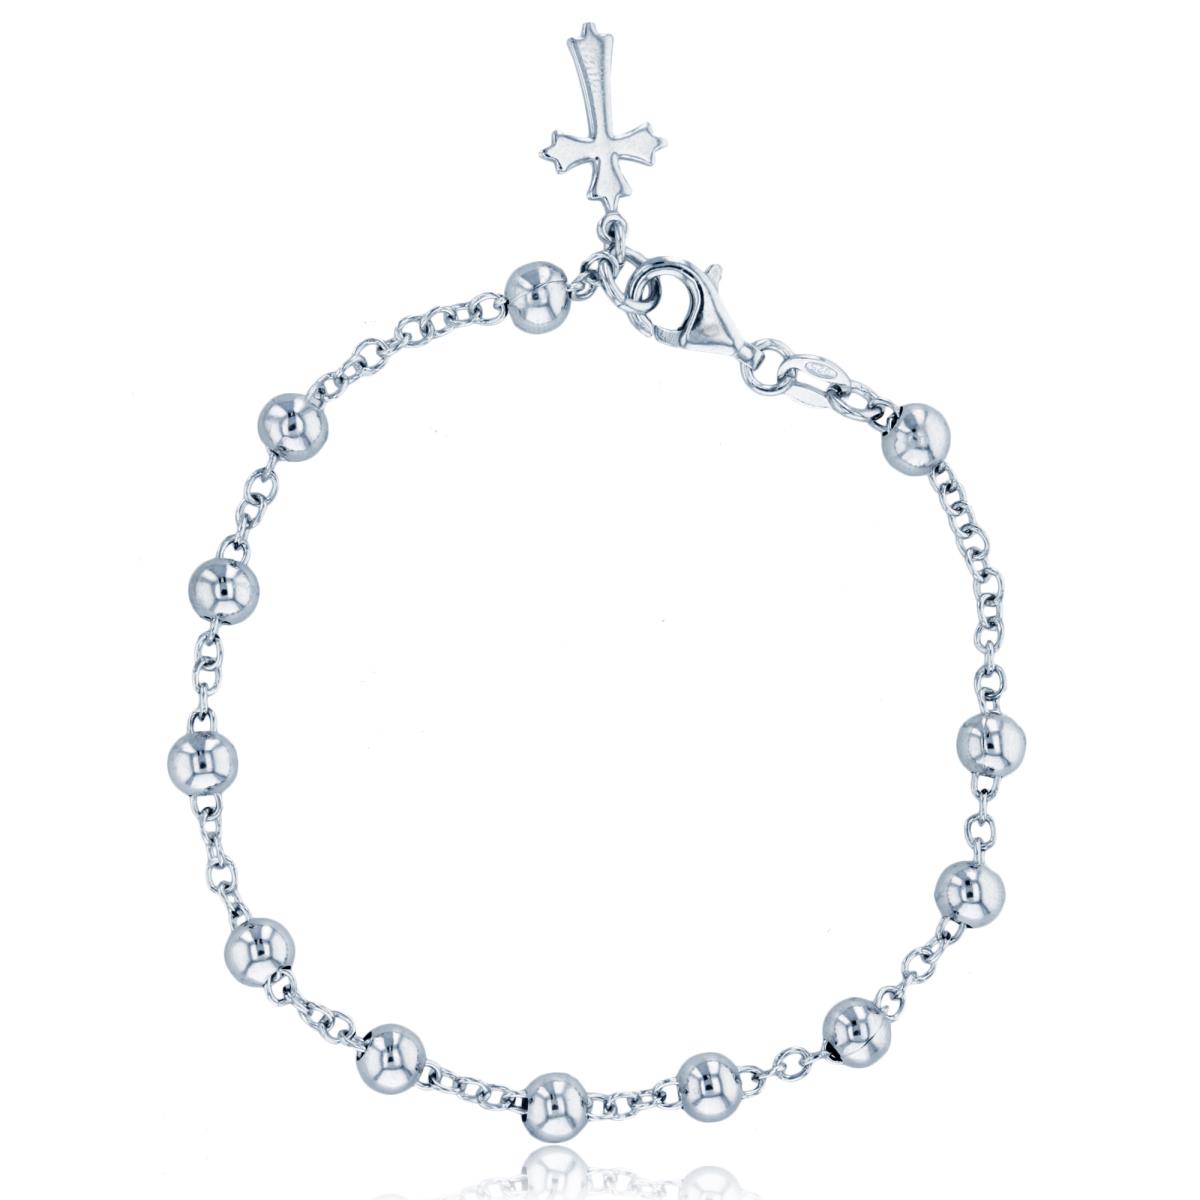 Sterling Silver Rhodium 5mm Polished Beads 7.5" Bracelet with Dangling Cross